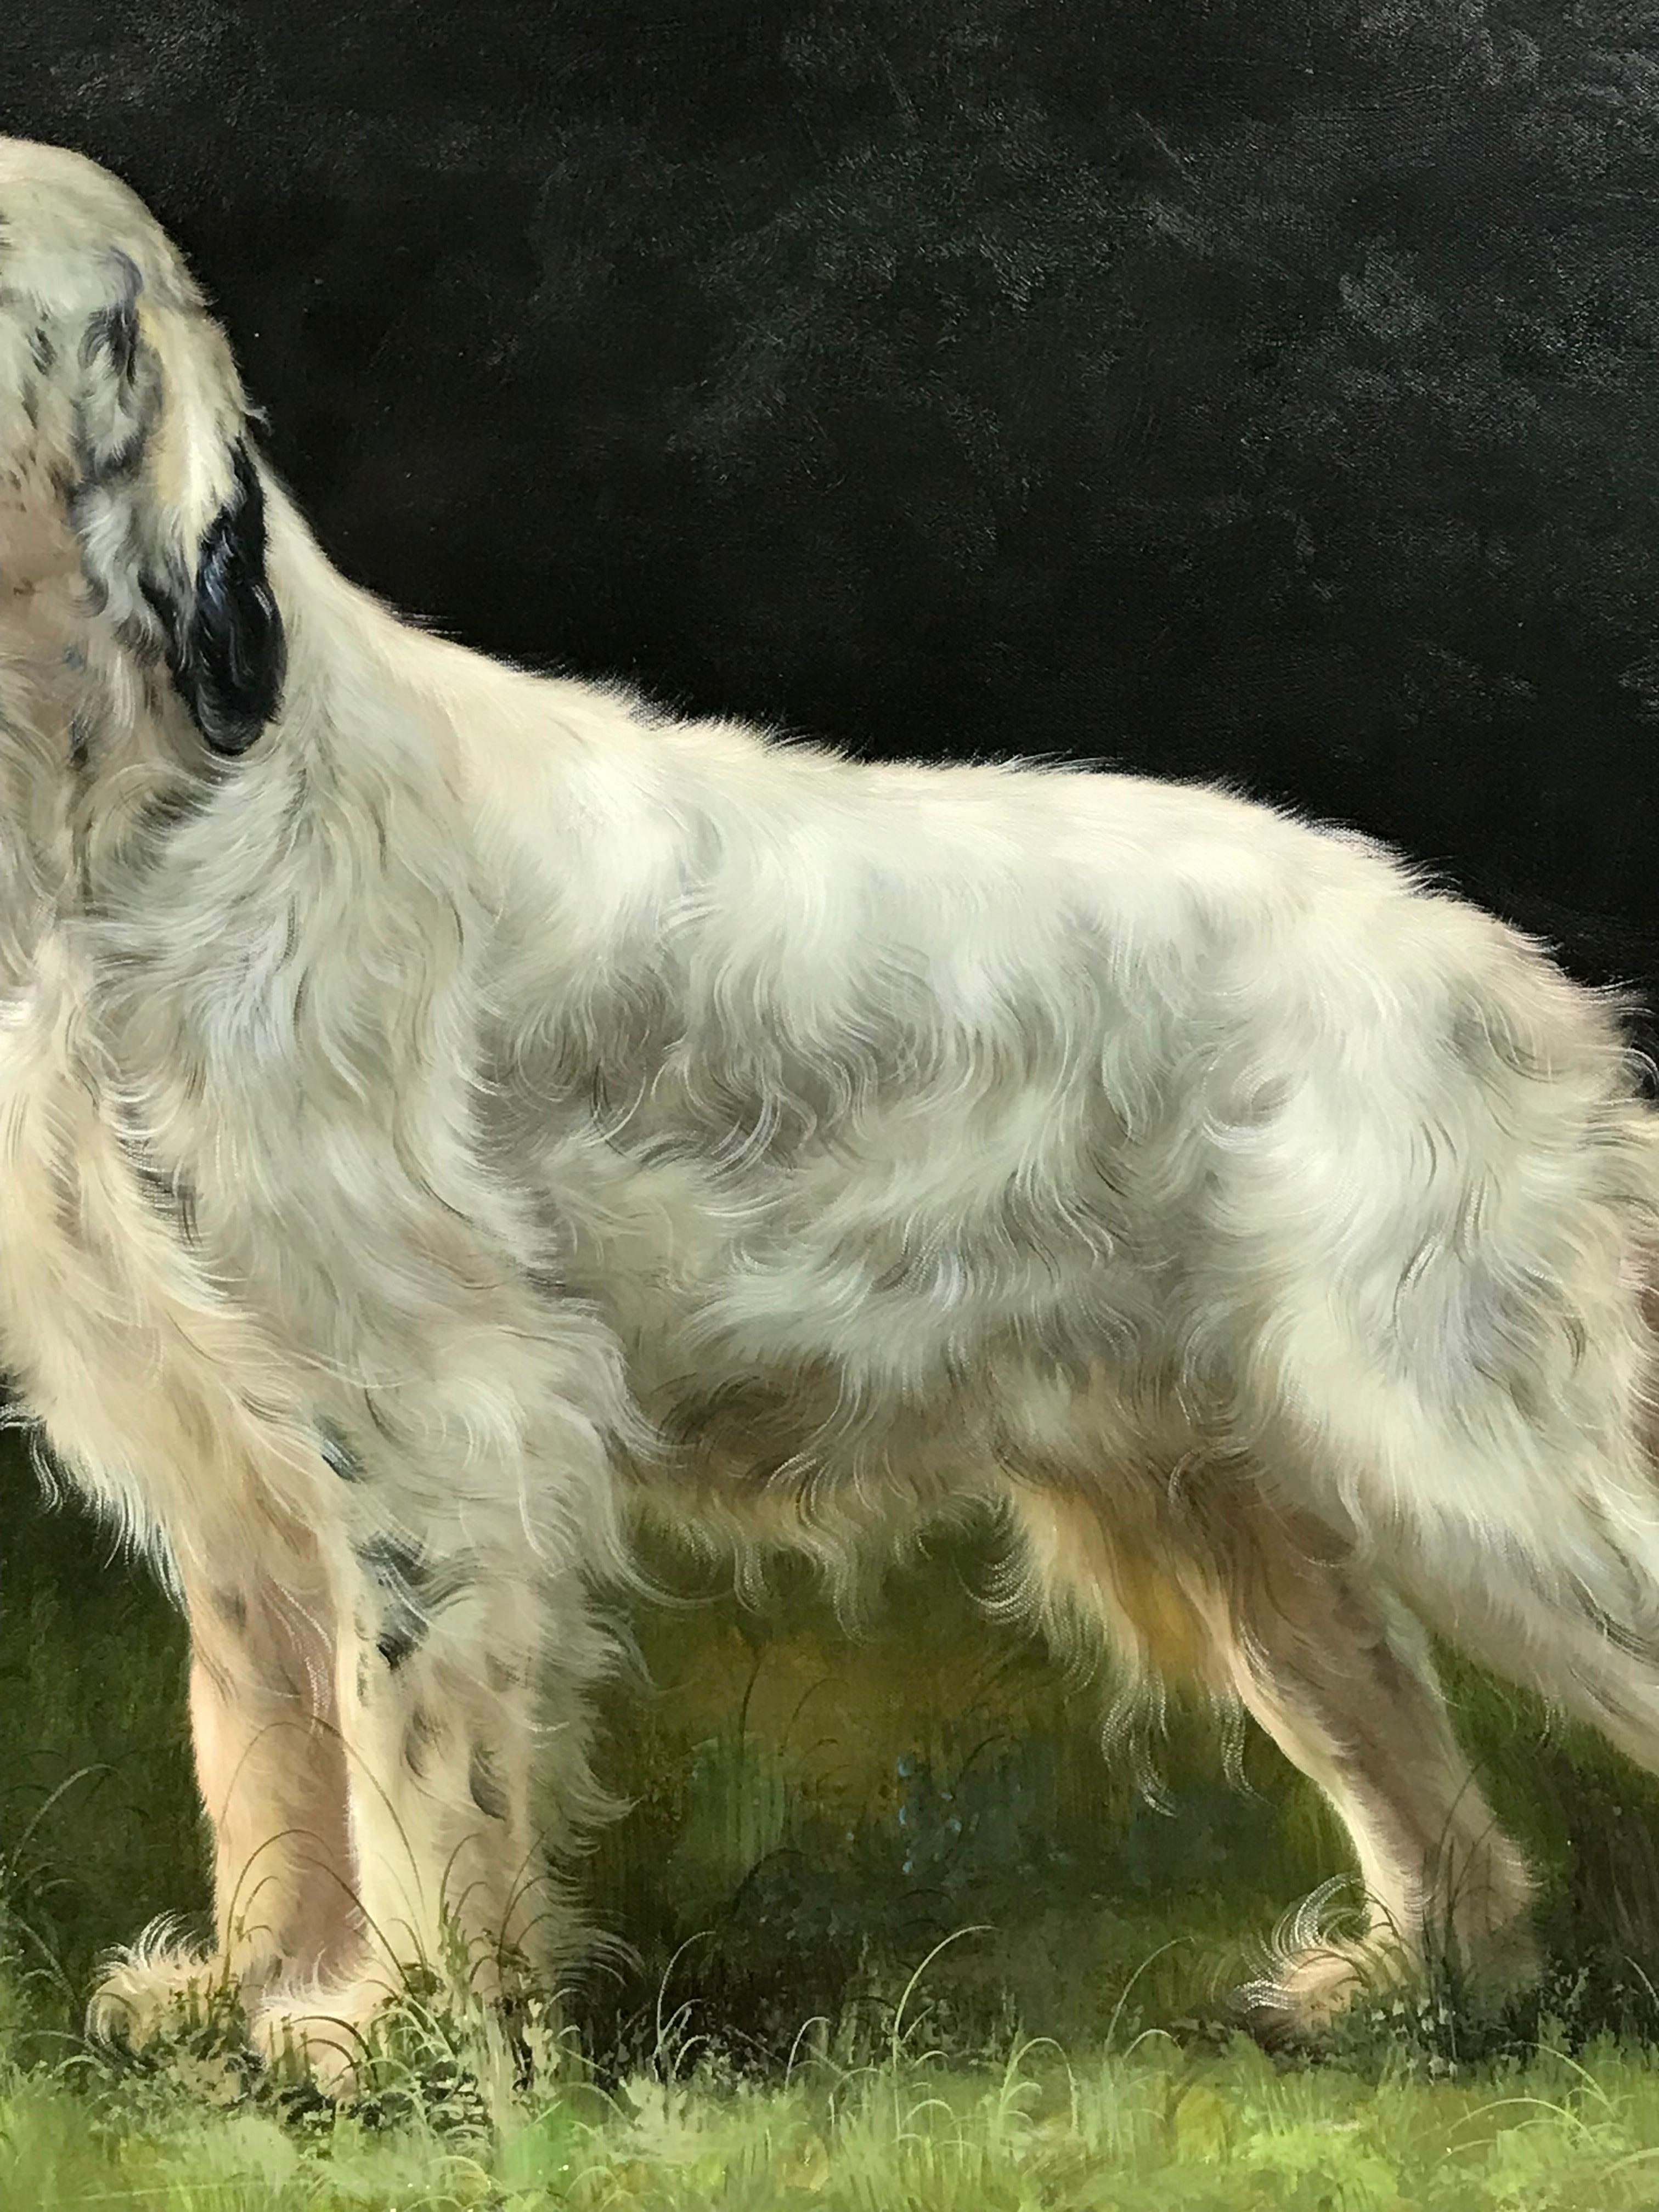 Artist/ School: French School, contemporary

Title: Setter (?) Dog in a Landscape

Medium: oil painting on canvas, unframed, signed

canvas: 20 x 24 inches

Provenance: private collection, France

Condition: The painting is in overall very good and